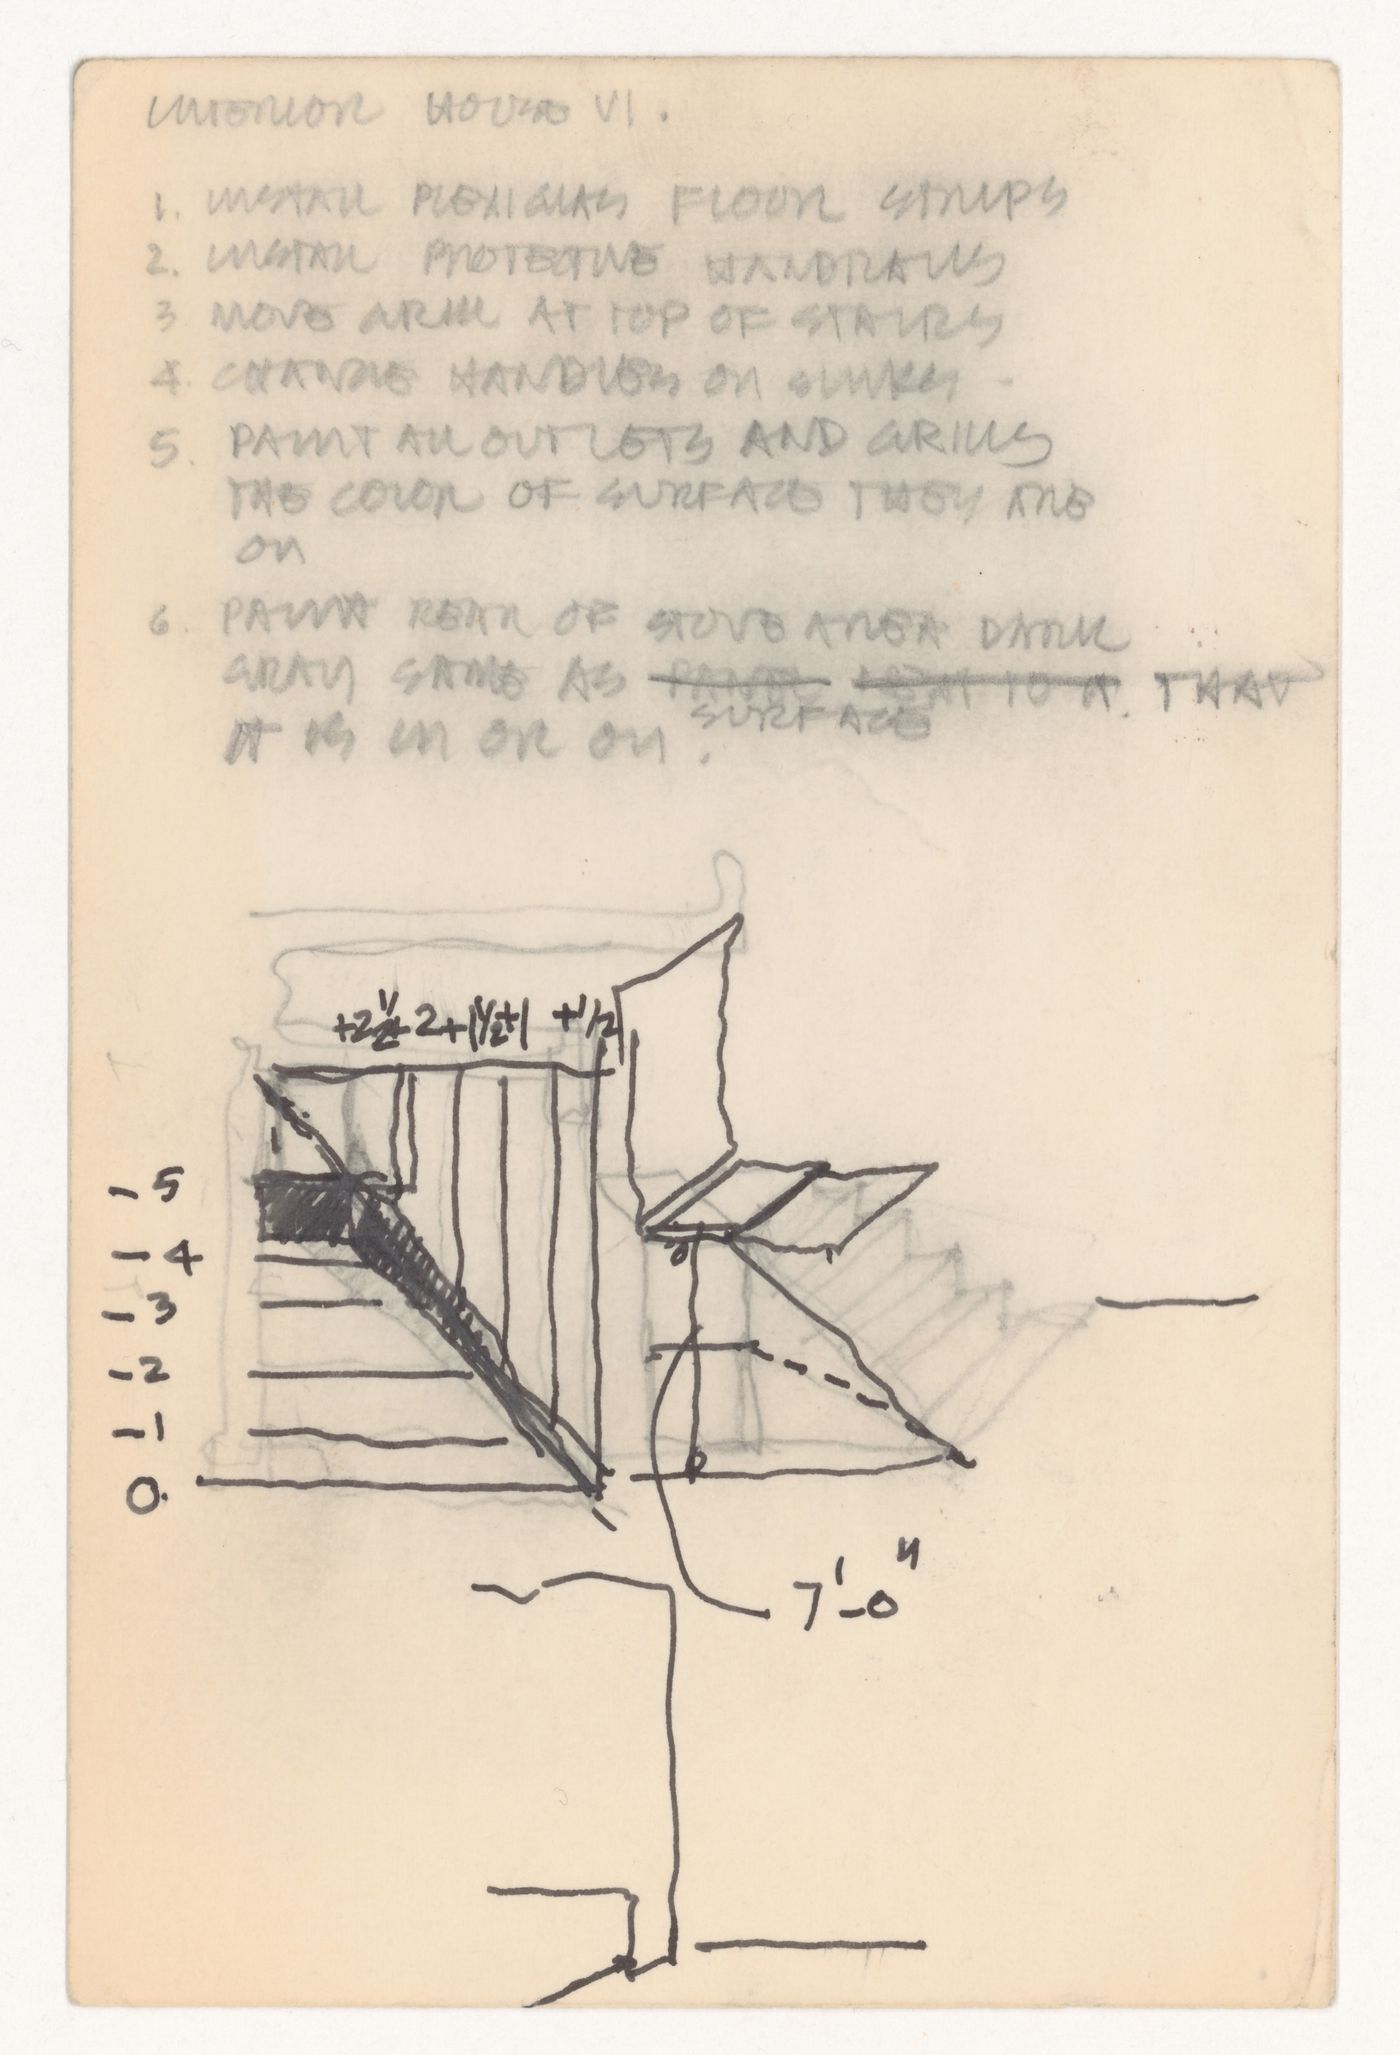 Notes and sketches for House VI, Cornwall, Connecticut